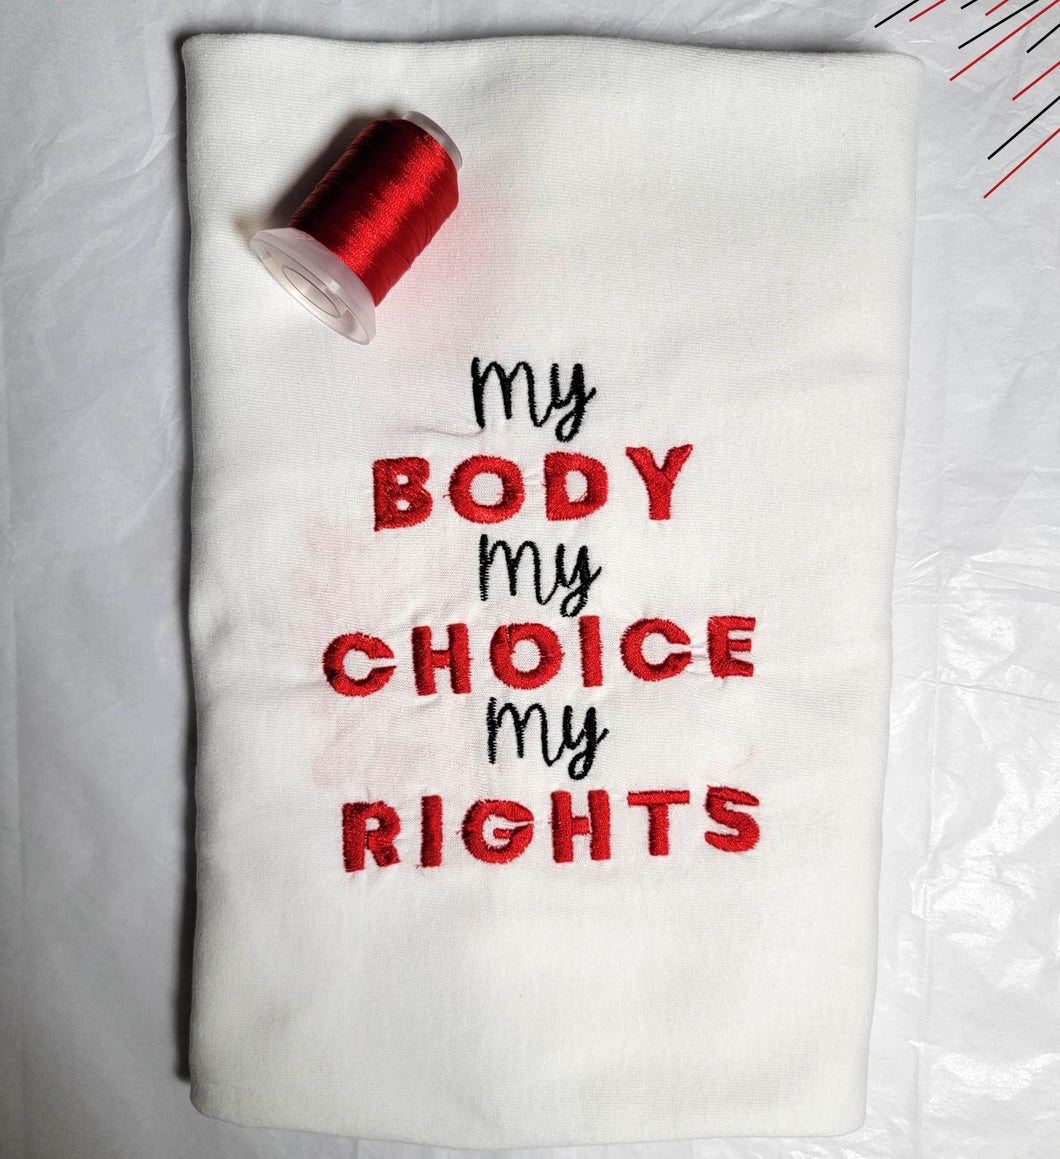 My Body, My Choice, My Rights (Plus Curve)